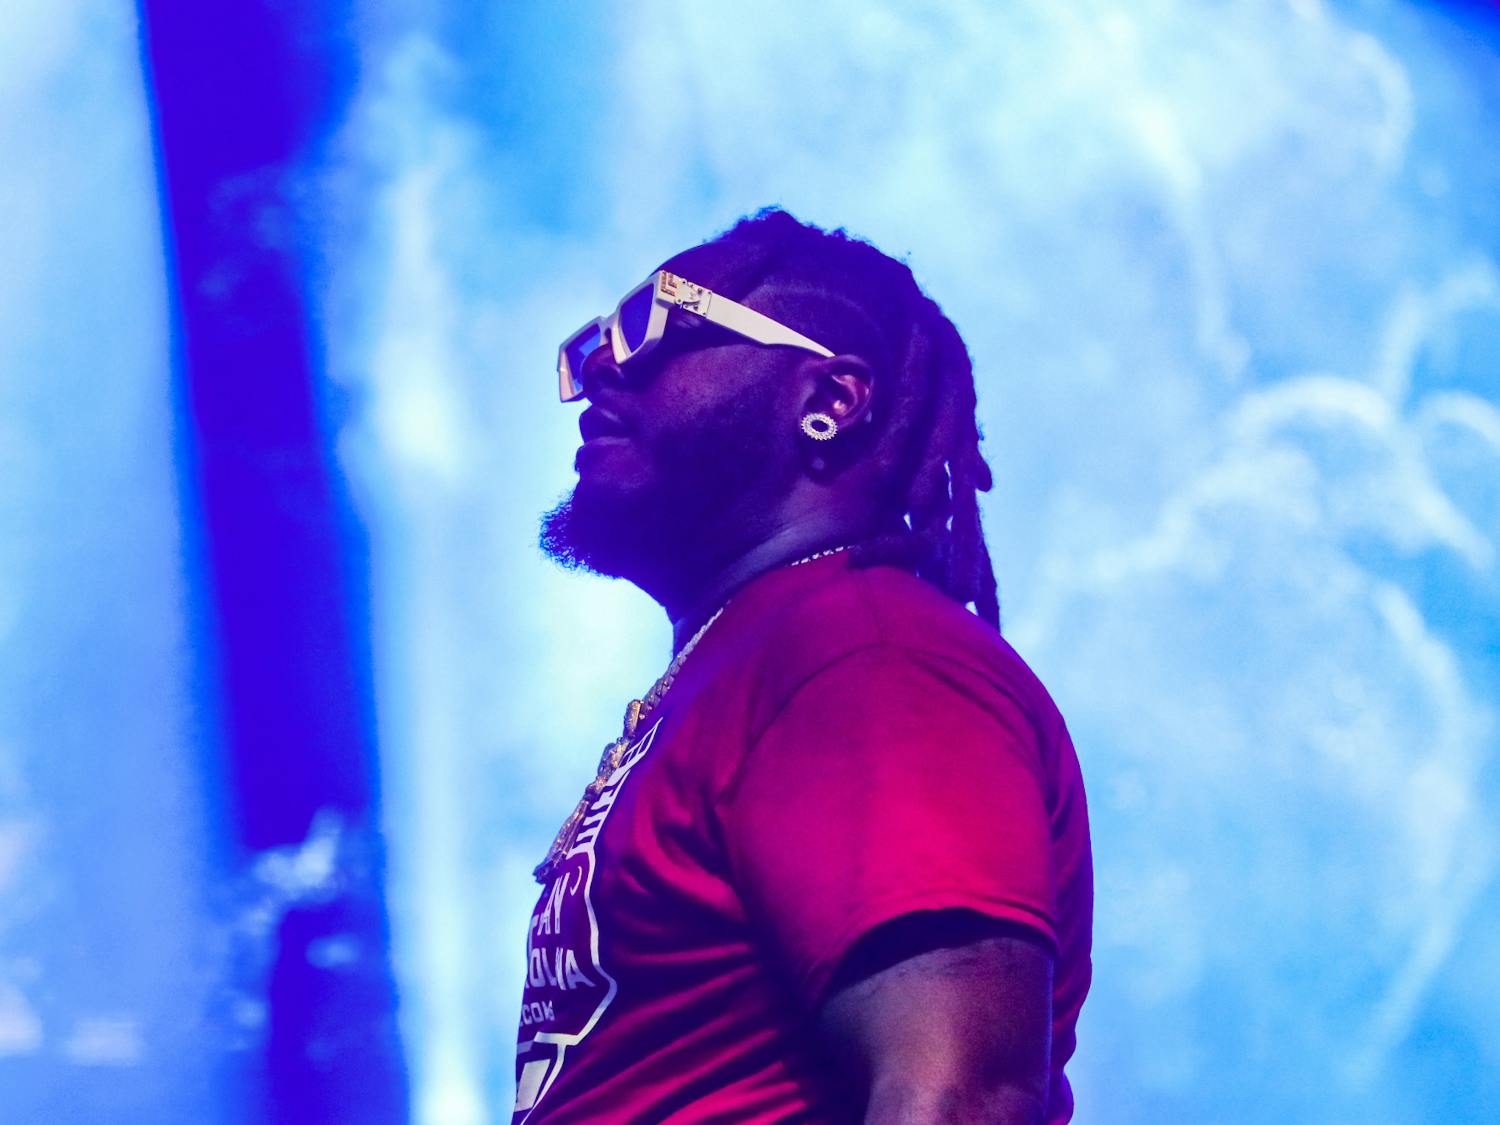 T-Pain performing at Cockstock on Oct. 21, 2022. He performed hits like “Bartender” to the sold out crowd at Colonial Life Arena.&nbsp;